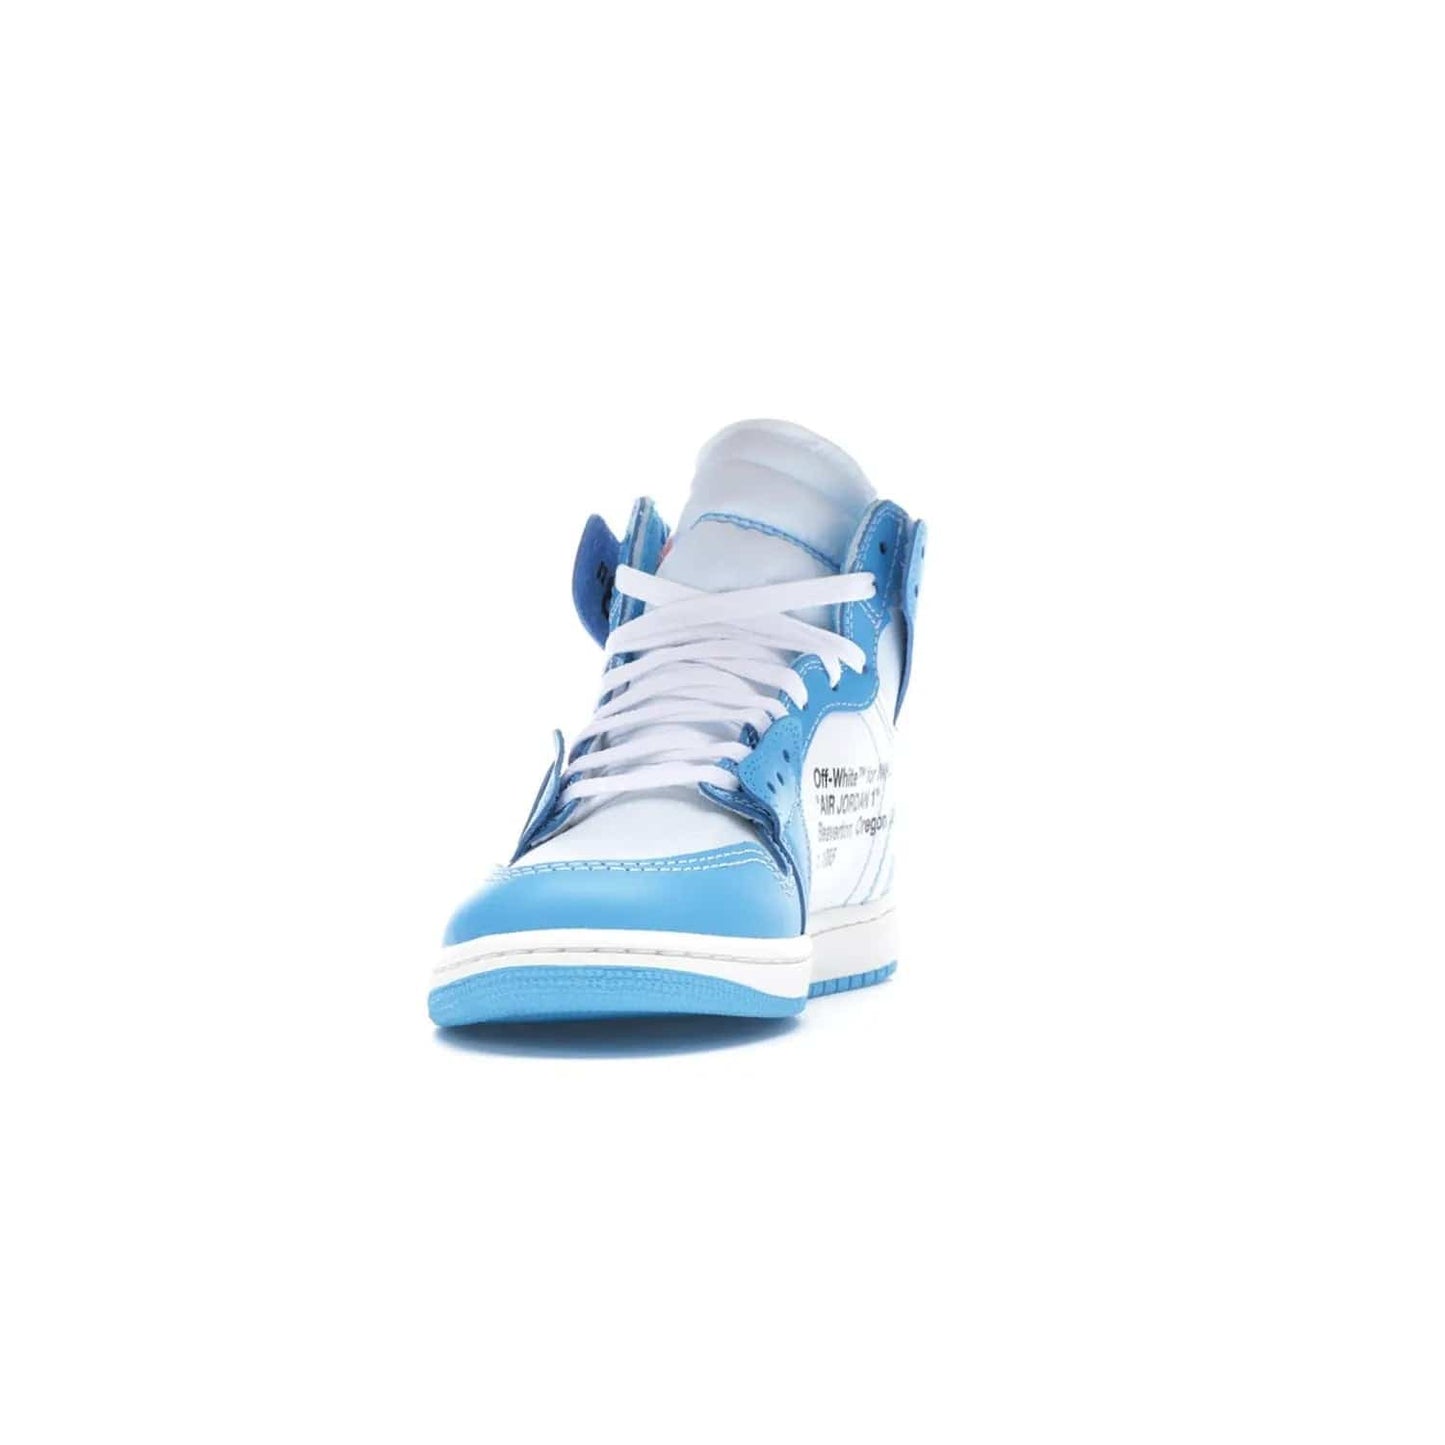 Jordan 1 Retro High Off-White University Blue - Image 12 - Only at www.BallersClubKickz.com - Classic Jordan 1 Retro High "Off-White UNC" sneakers meld style and comfort. Boasting deconstructed white and blue leather, Off-White detailing, and a white, dark powder blue and cone colorway, these sneakers are perfect for dressing up or down. Get the iconic Off-White Jordan 1's and upgrade your look.